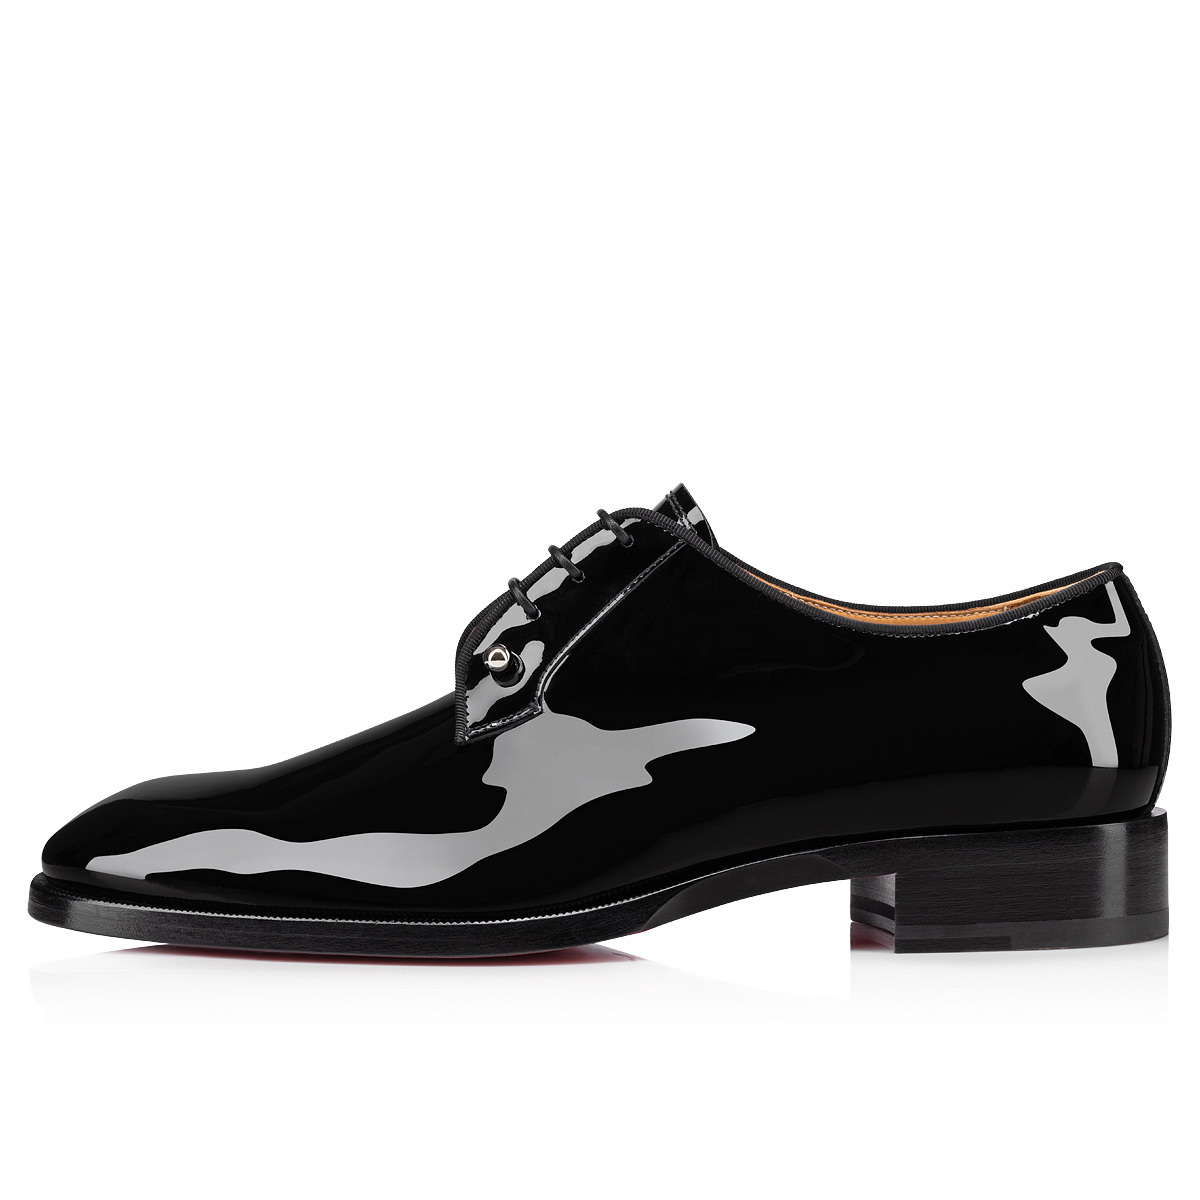 Christian Louboutin Chambeliss Croc-Embossed Derby Shoes - Black - 41